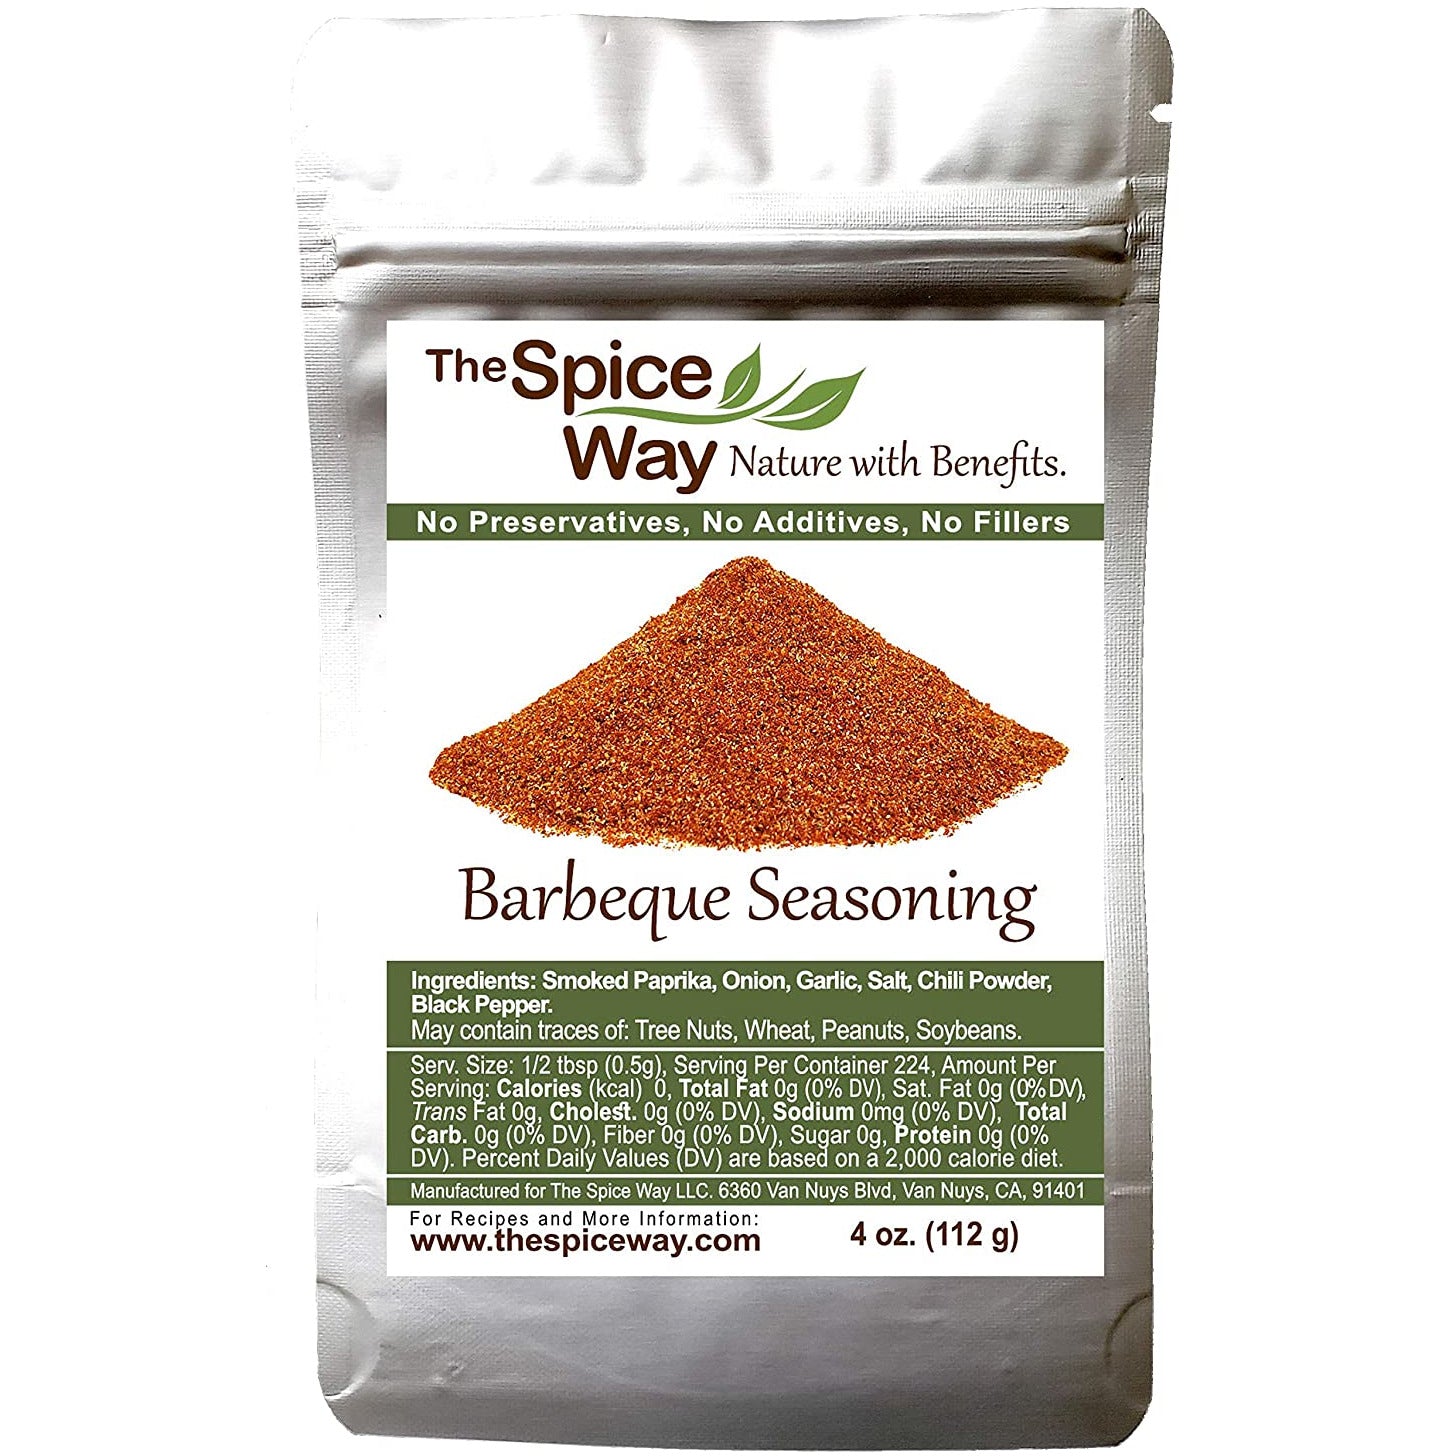 The Spice Way Barbeque Seasoning - pure spice blend, Non-GMO, no preservatives, no additives, no fillers. BBQ steak, meat and chicken. easy made rub. 4 oz resealable bag